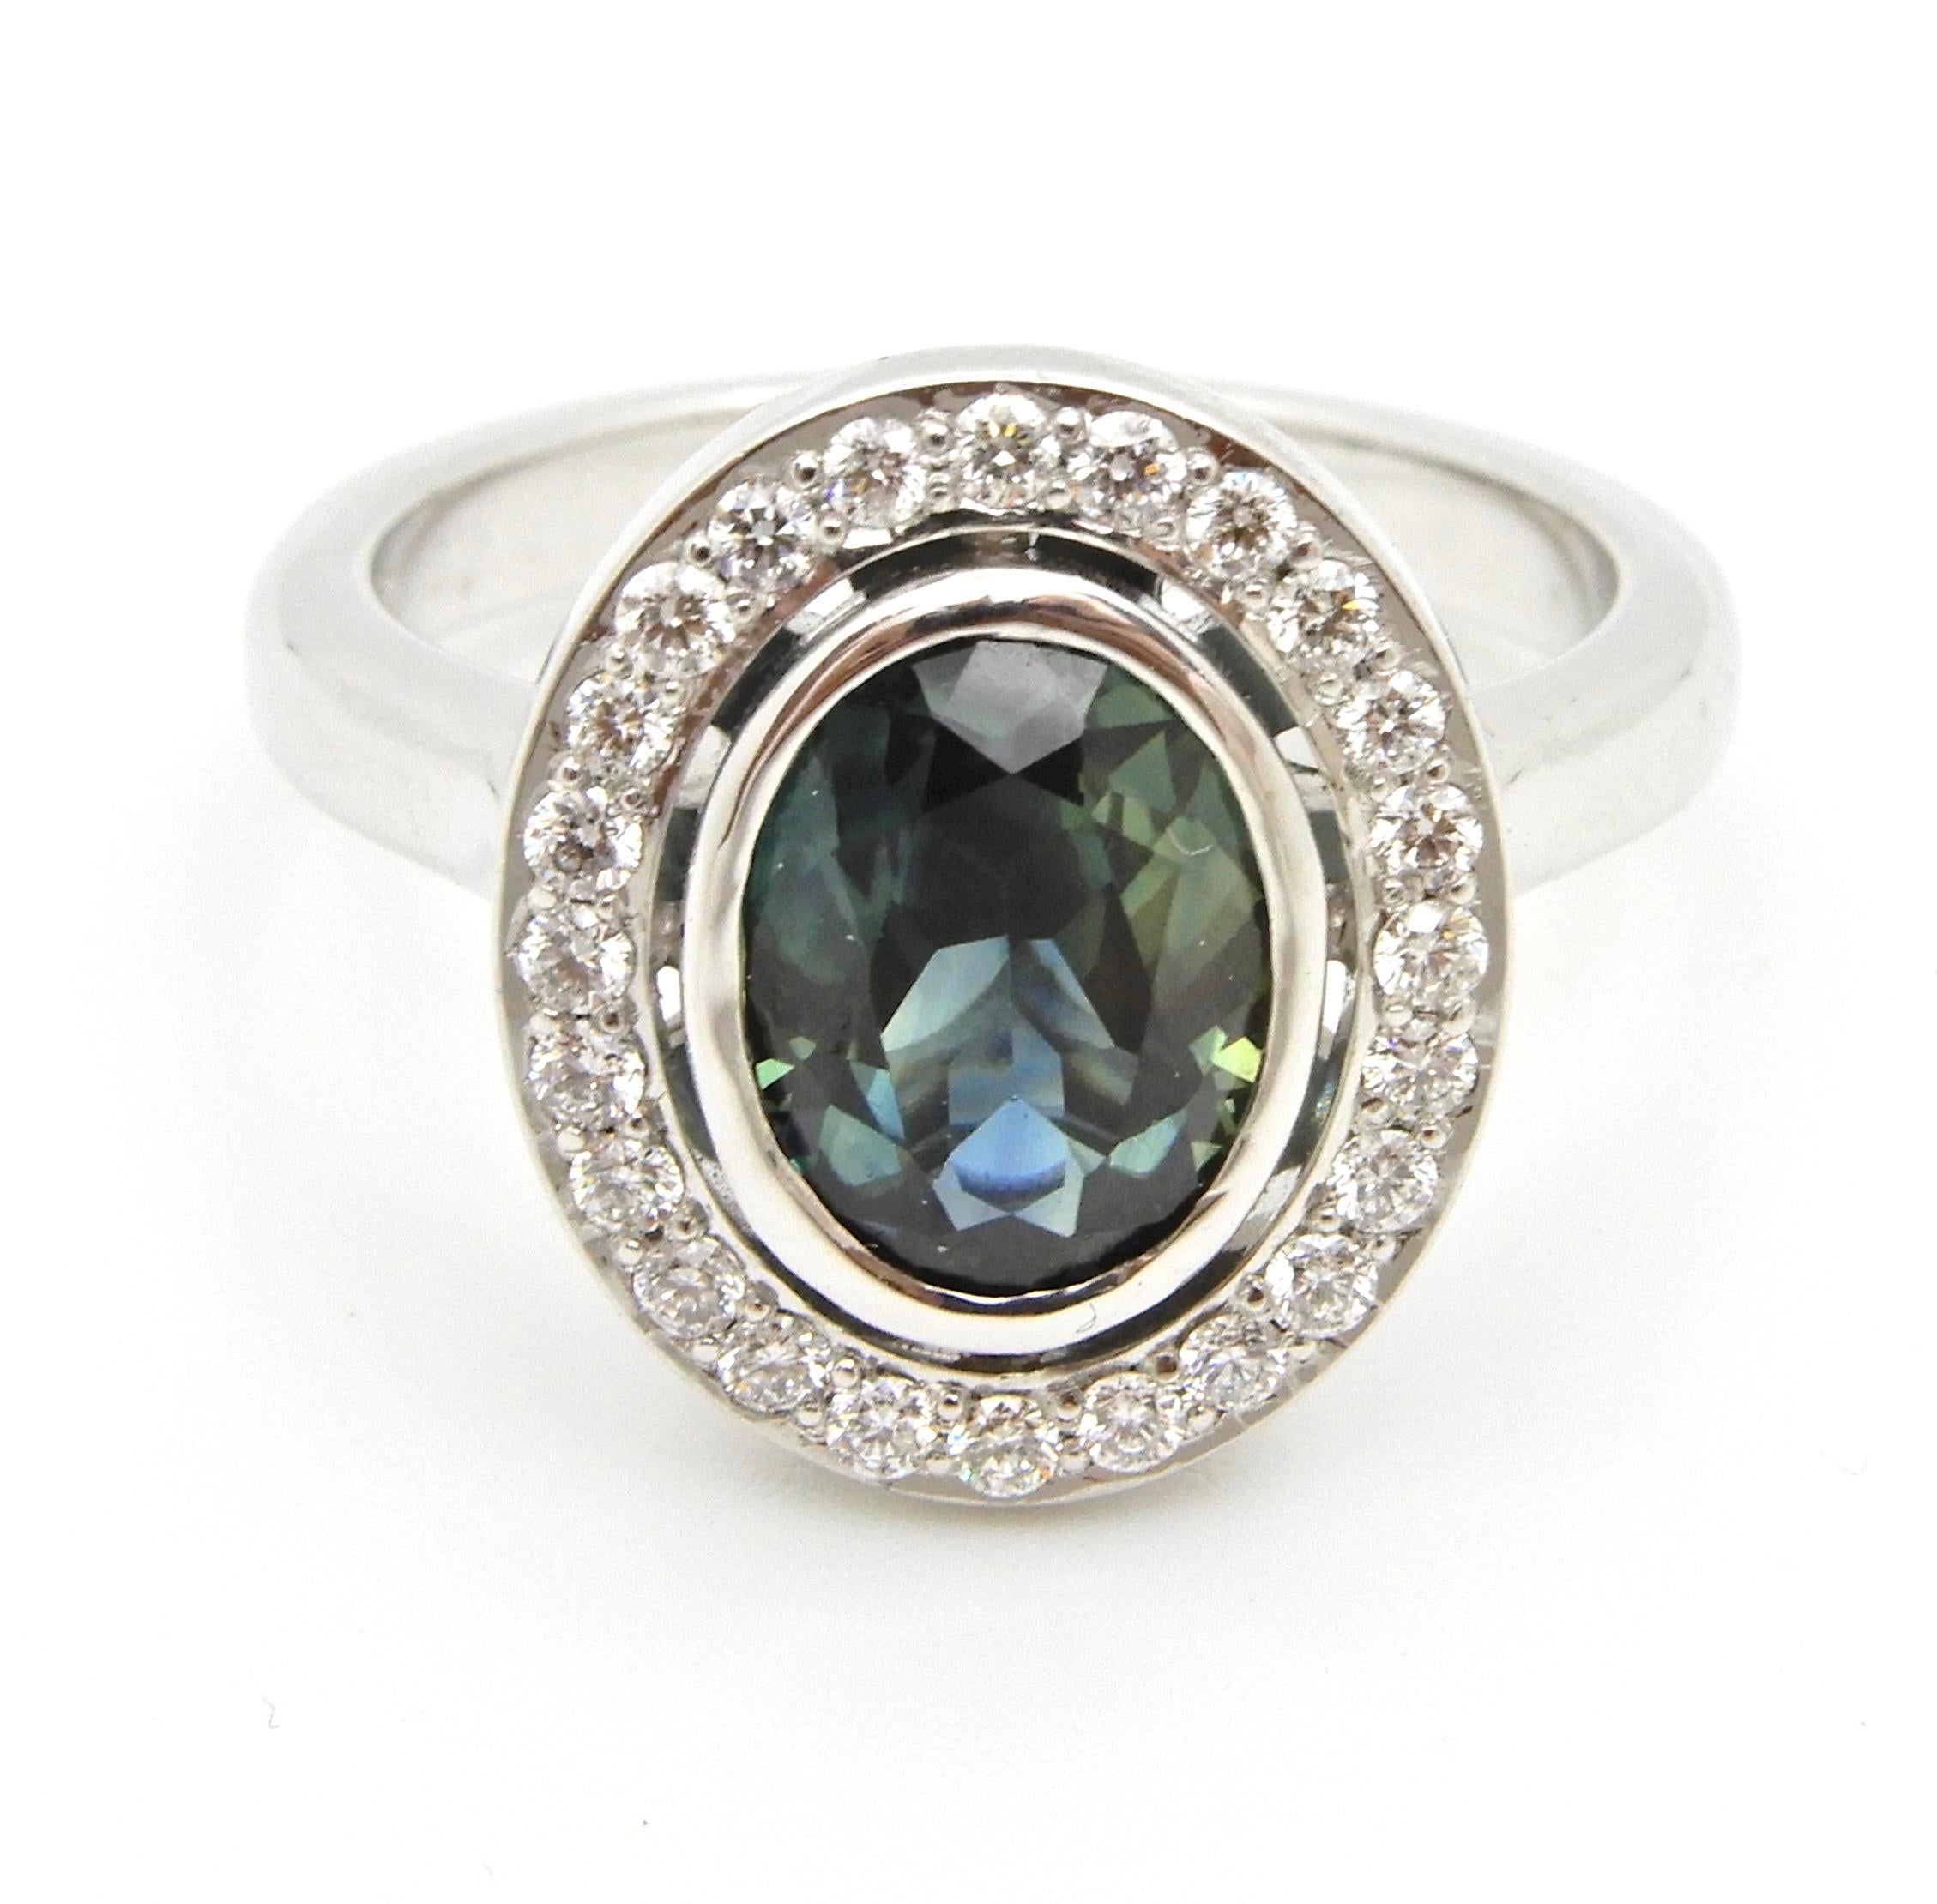 This 1.65 Carat Oval Cut Teal Blue Sapphire and Diamond Engagement Ring has a slightly rounded, flat edge band with rising, pointed shoulders that supports a central, scalloped oval gallery holding the central rub over oval sapphire. The ring